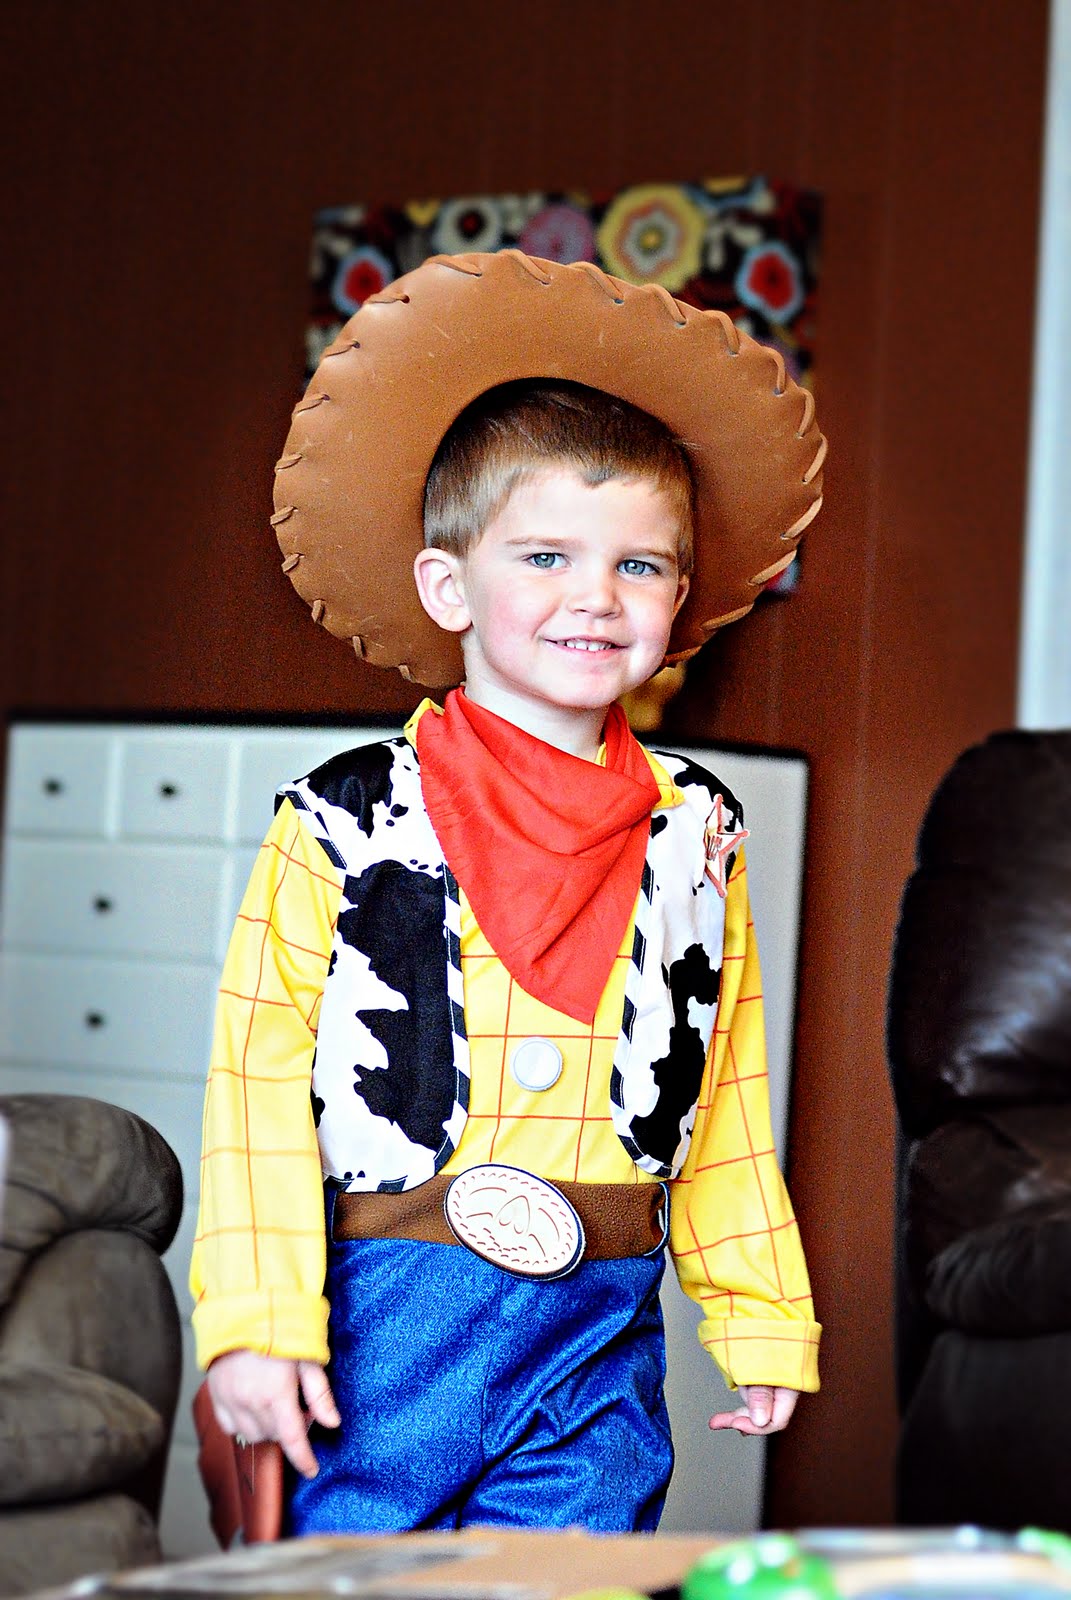 Hello, You've Reached the Horvath's: Sheriff Woody